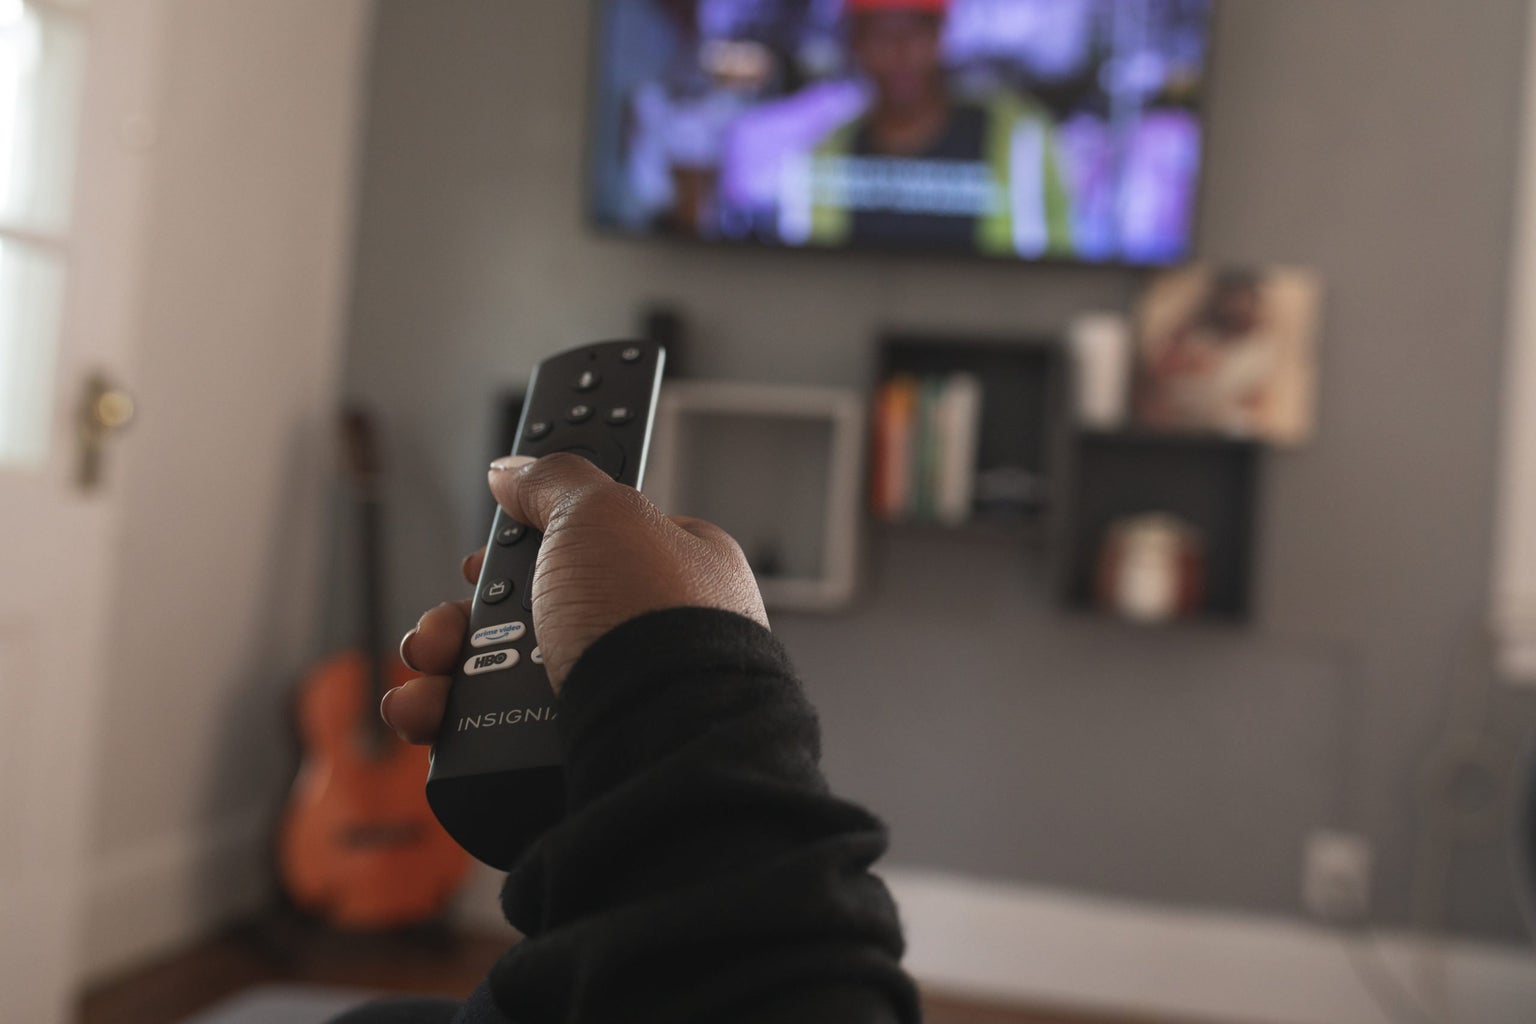 Hand holding remote pointed at tv screen